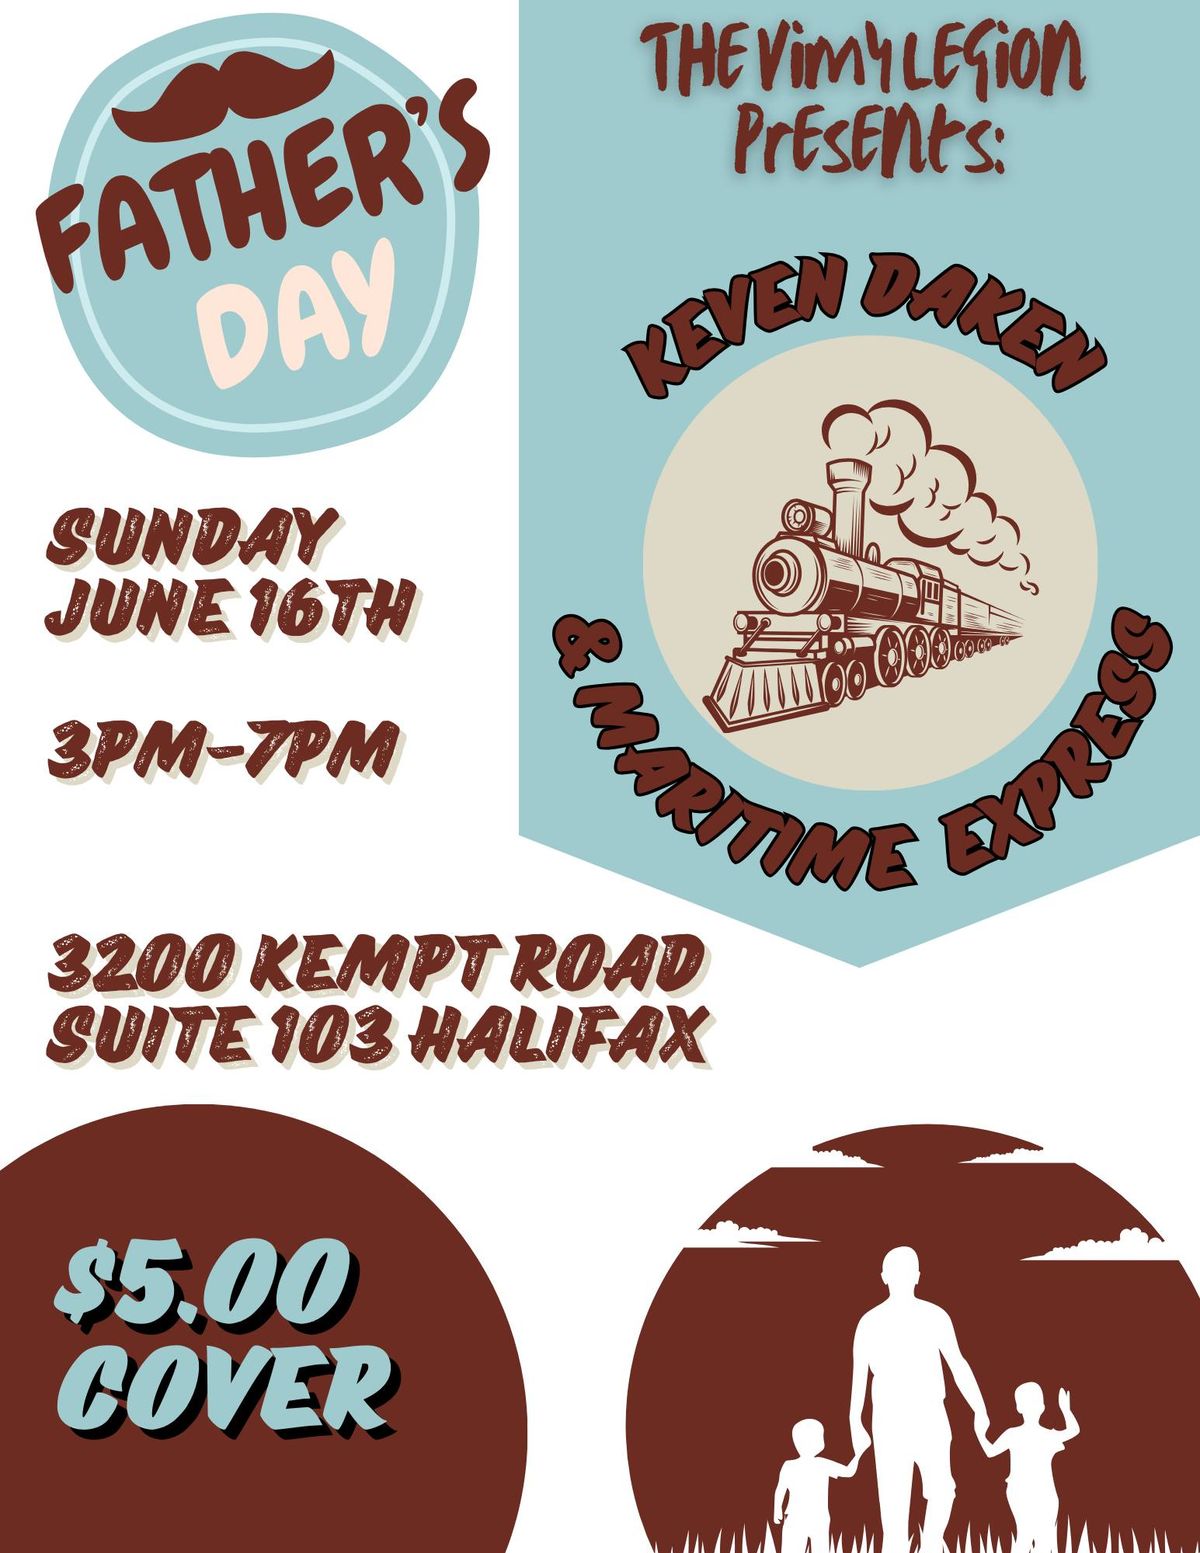 Vimy Legion Father's Day